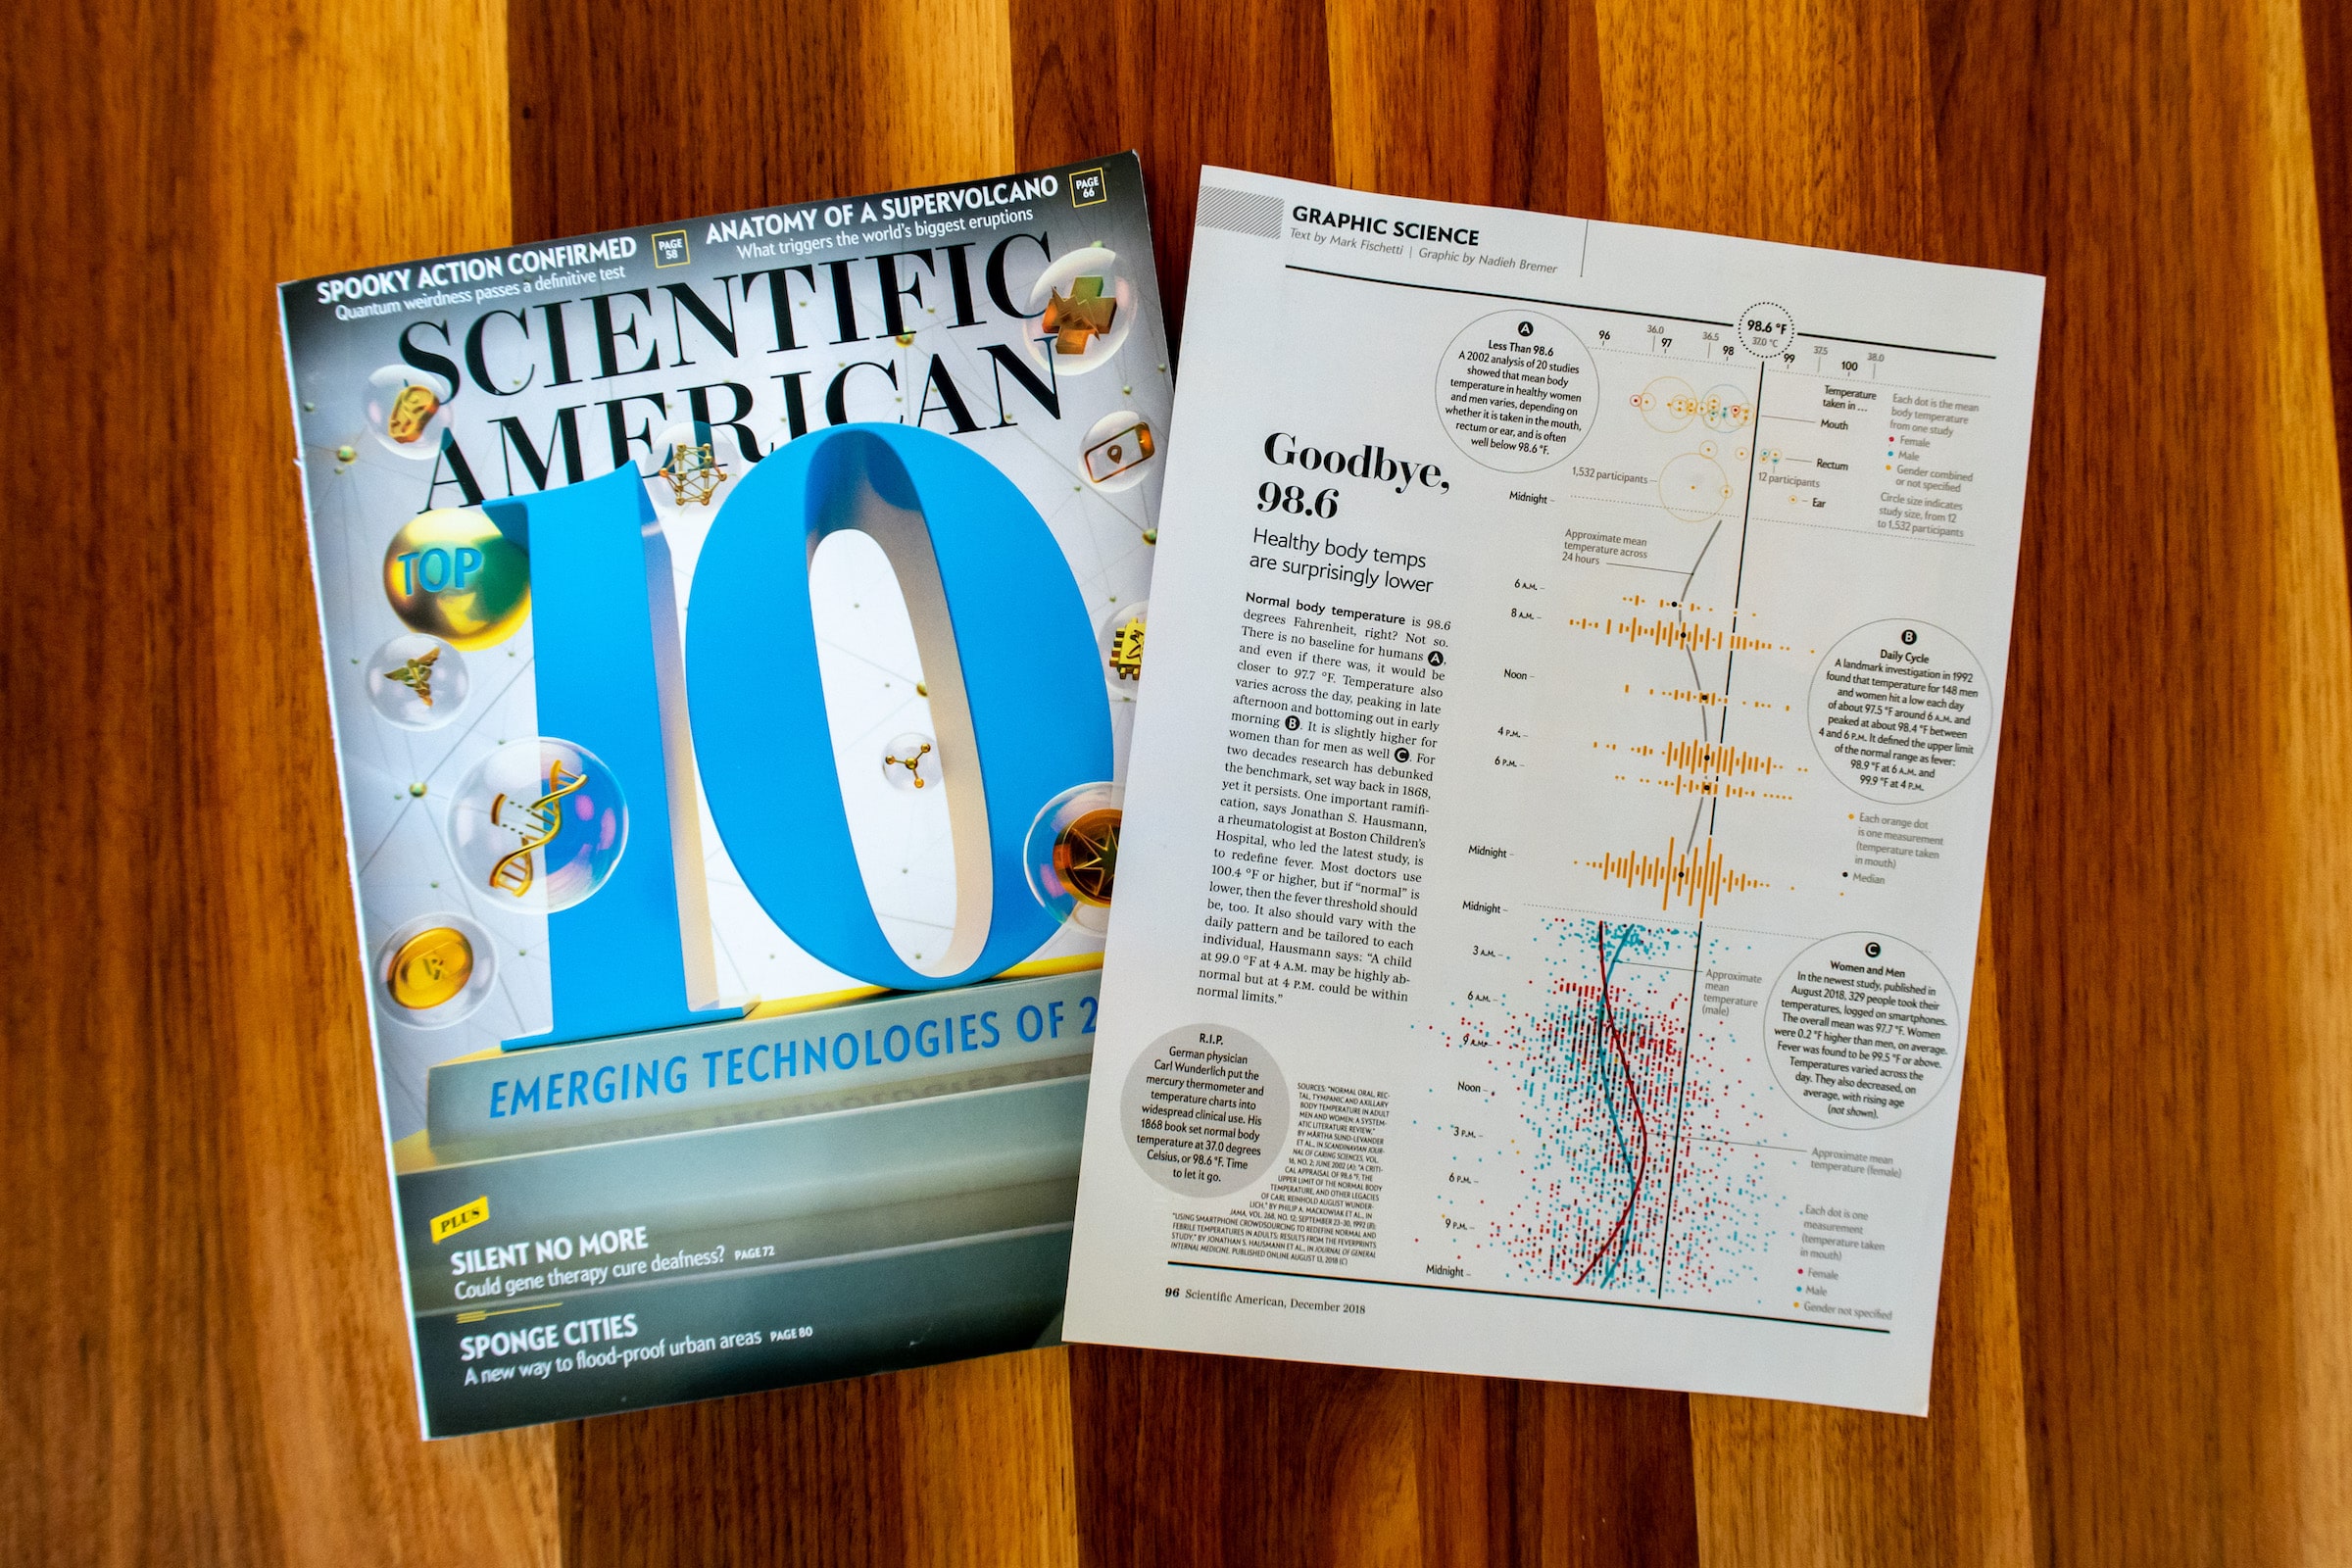 The Graphic Science page together with the front of the magazine